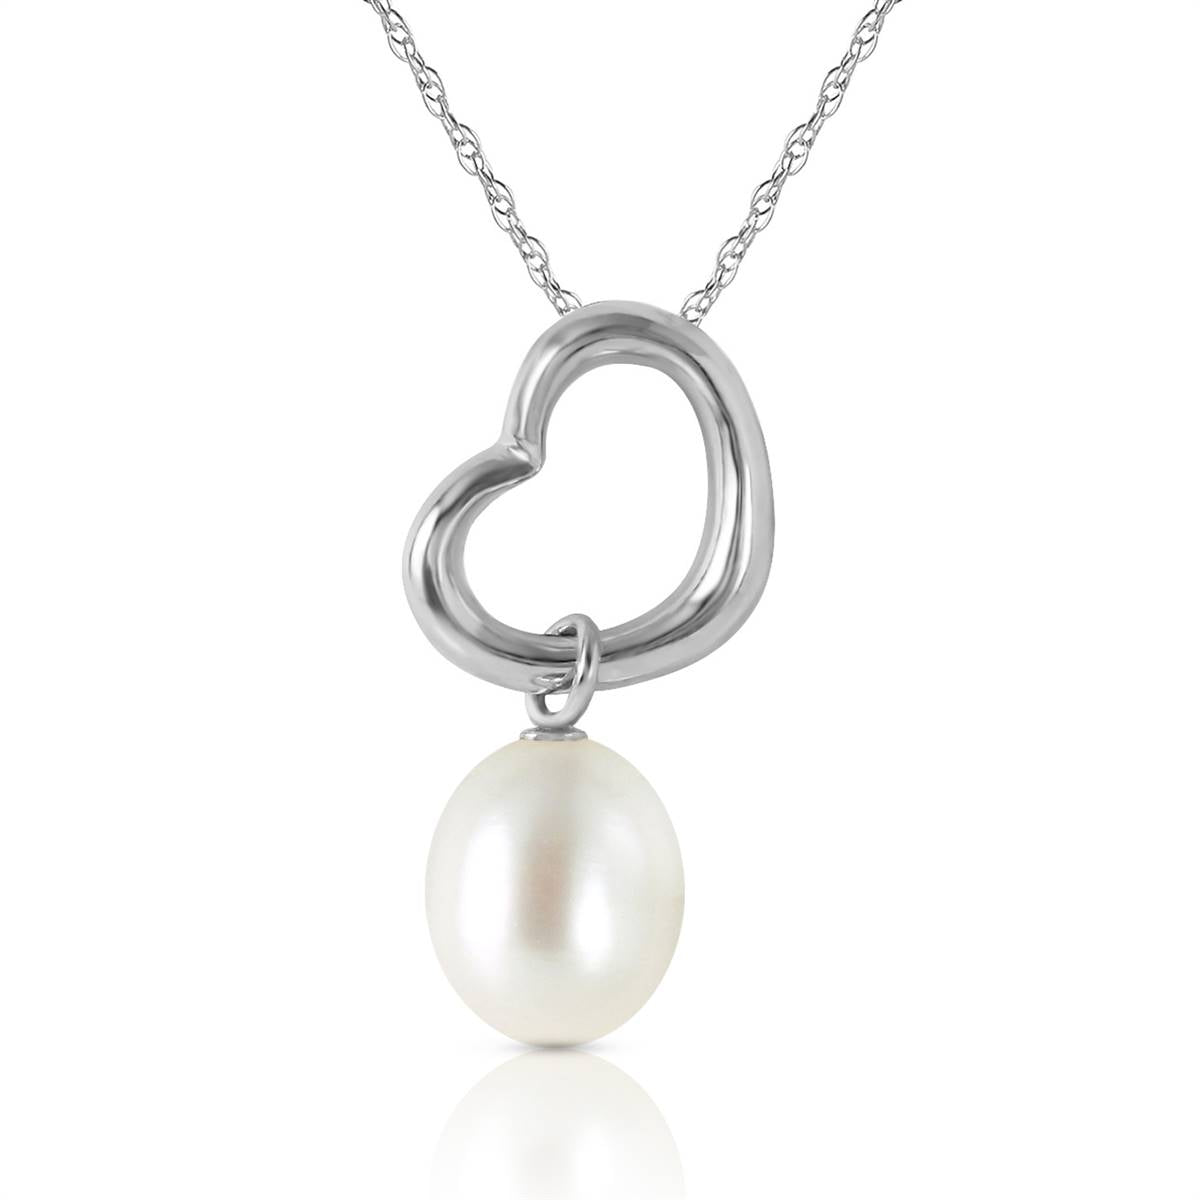 14K Solid White Gold Heart Necklace w/ Dangling Natural Pearl